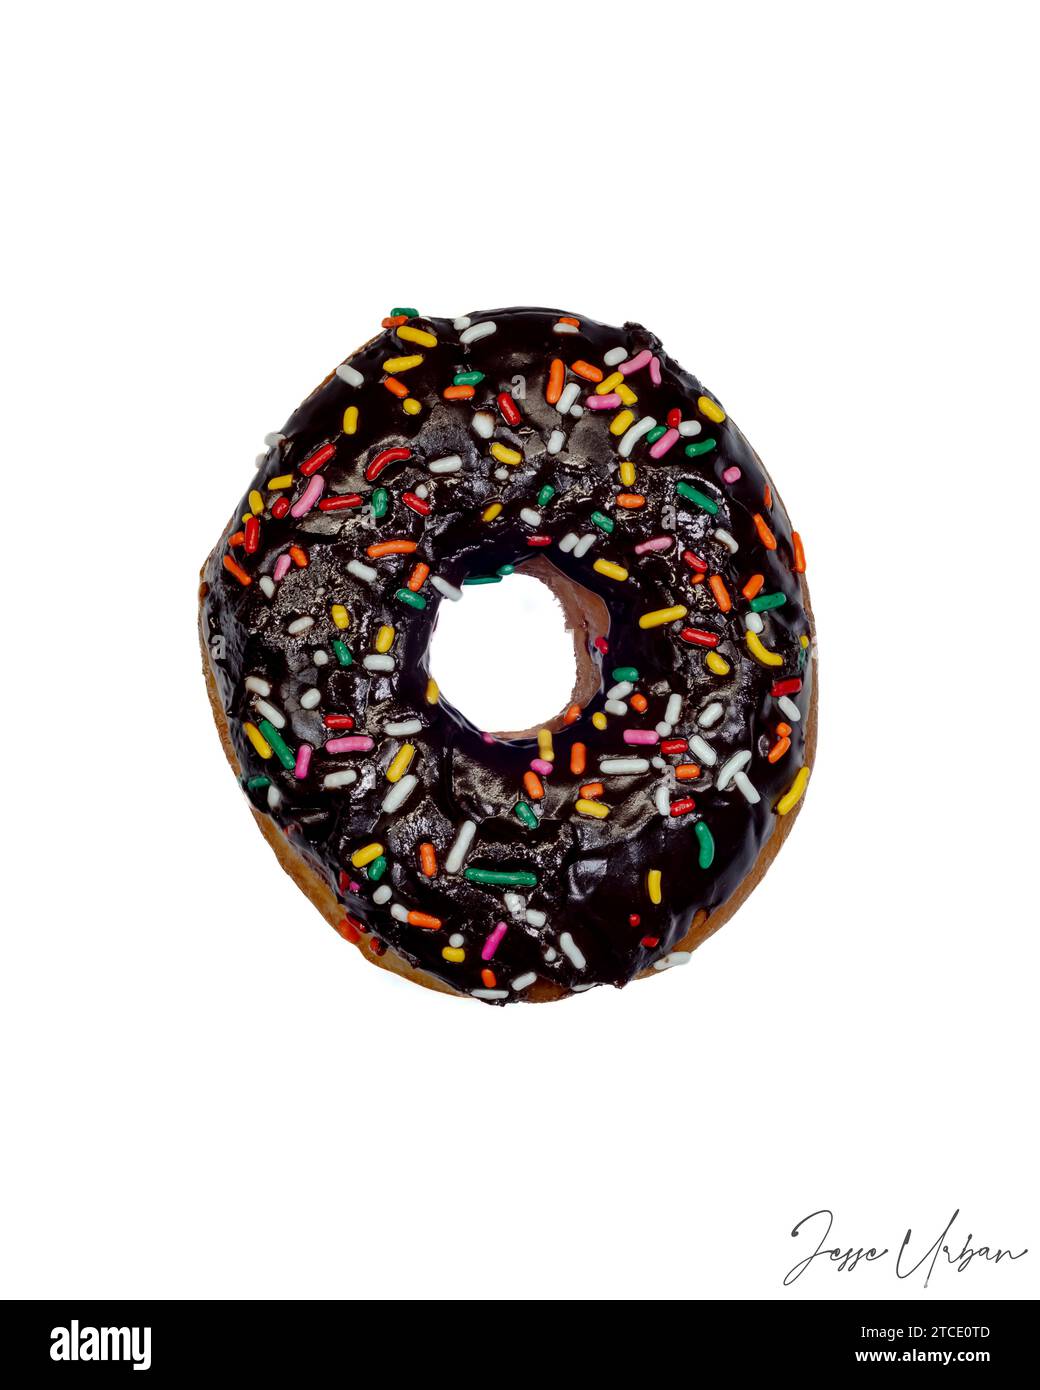 An appetizing chocolate donut with colorful sprinkles, freshly glazed and ready to be enjoyed Stock Photo